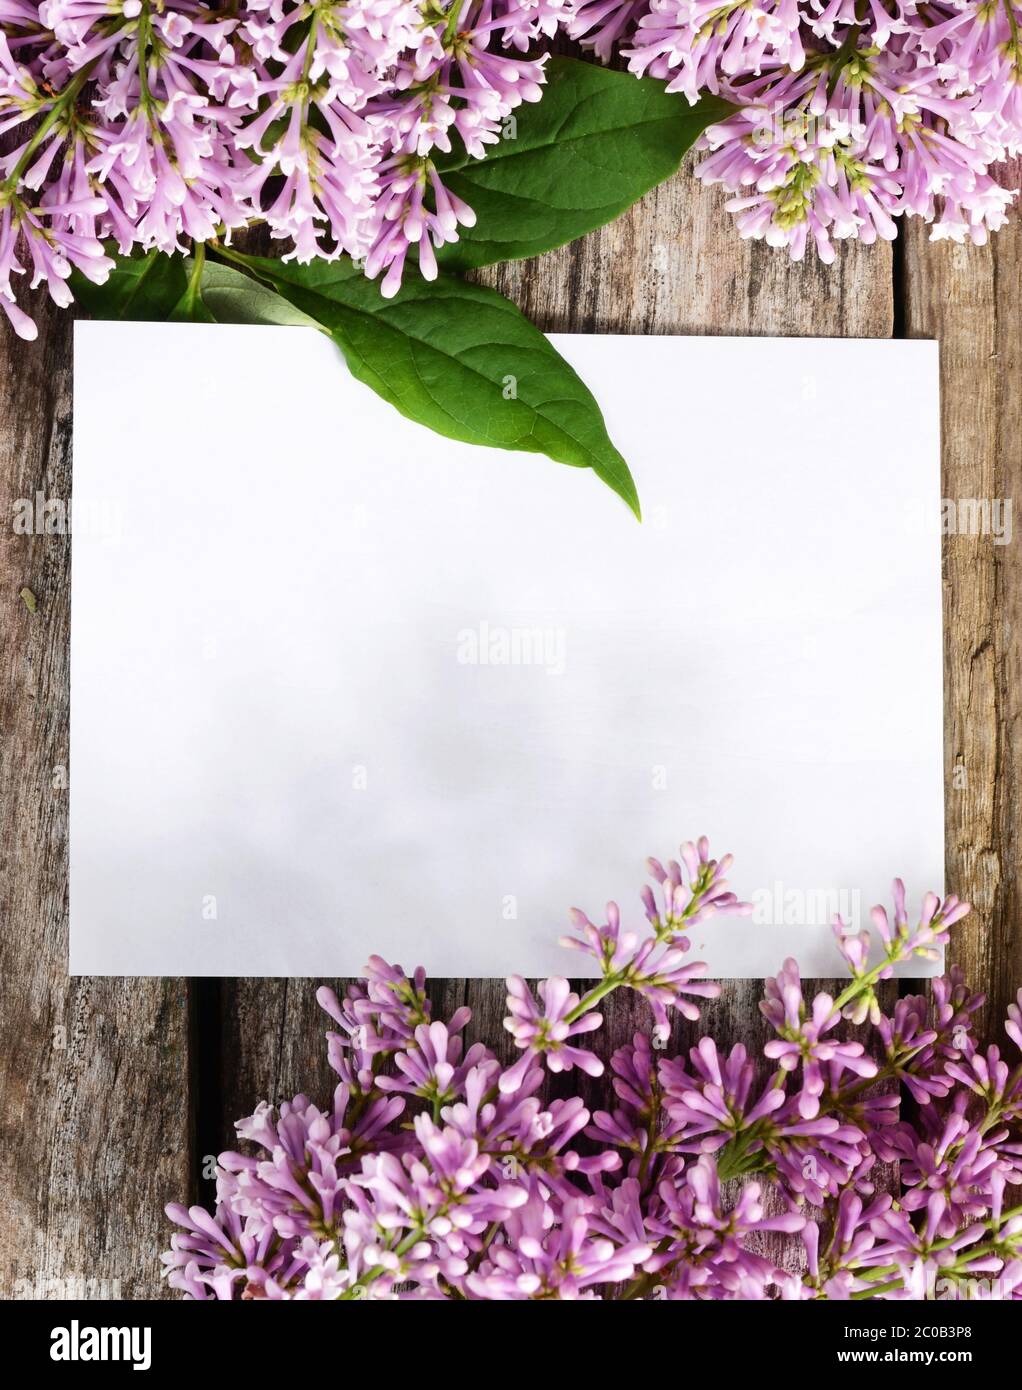 The flower lilac a wooden background Stock Photo